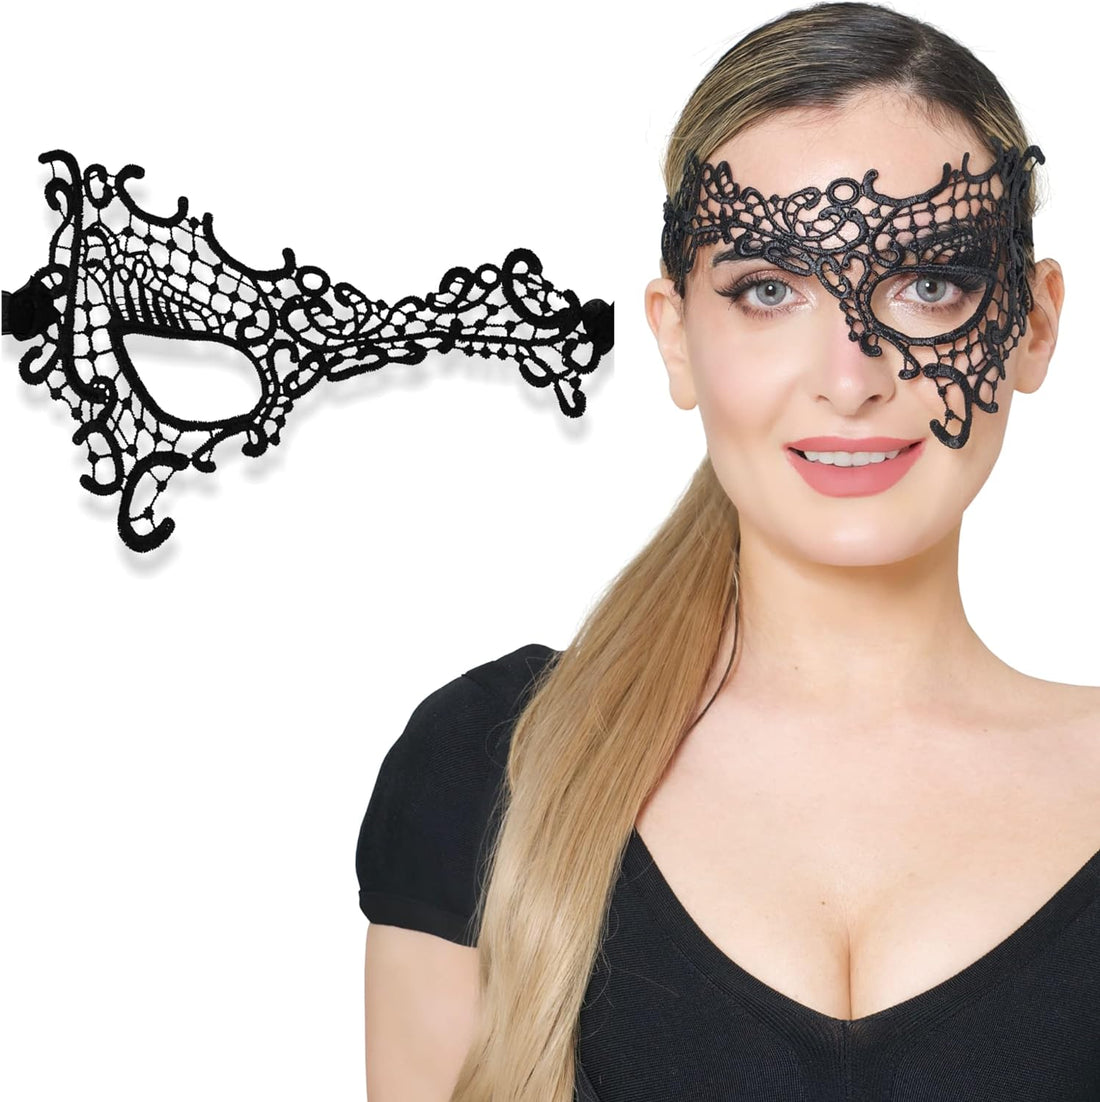 The Art of Dressing for Prom and Masquerade Parties